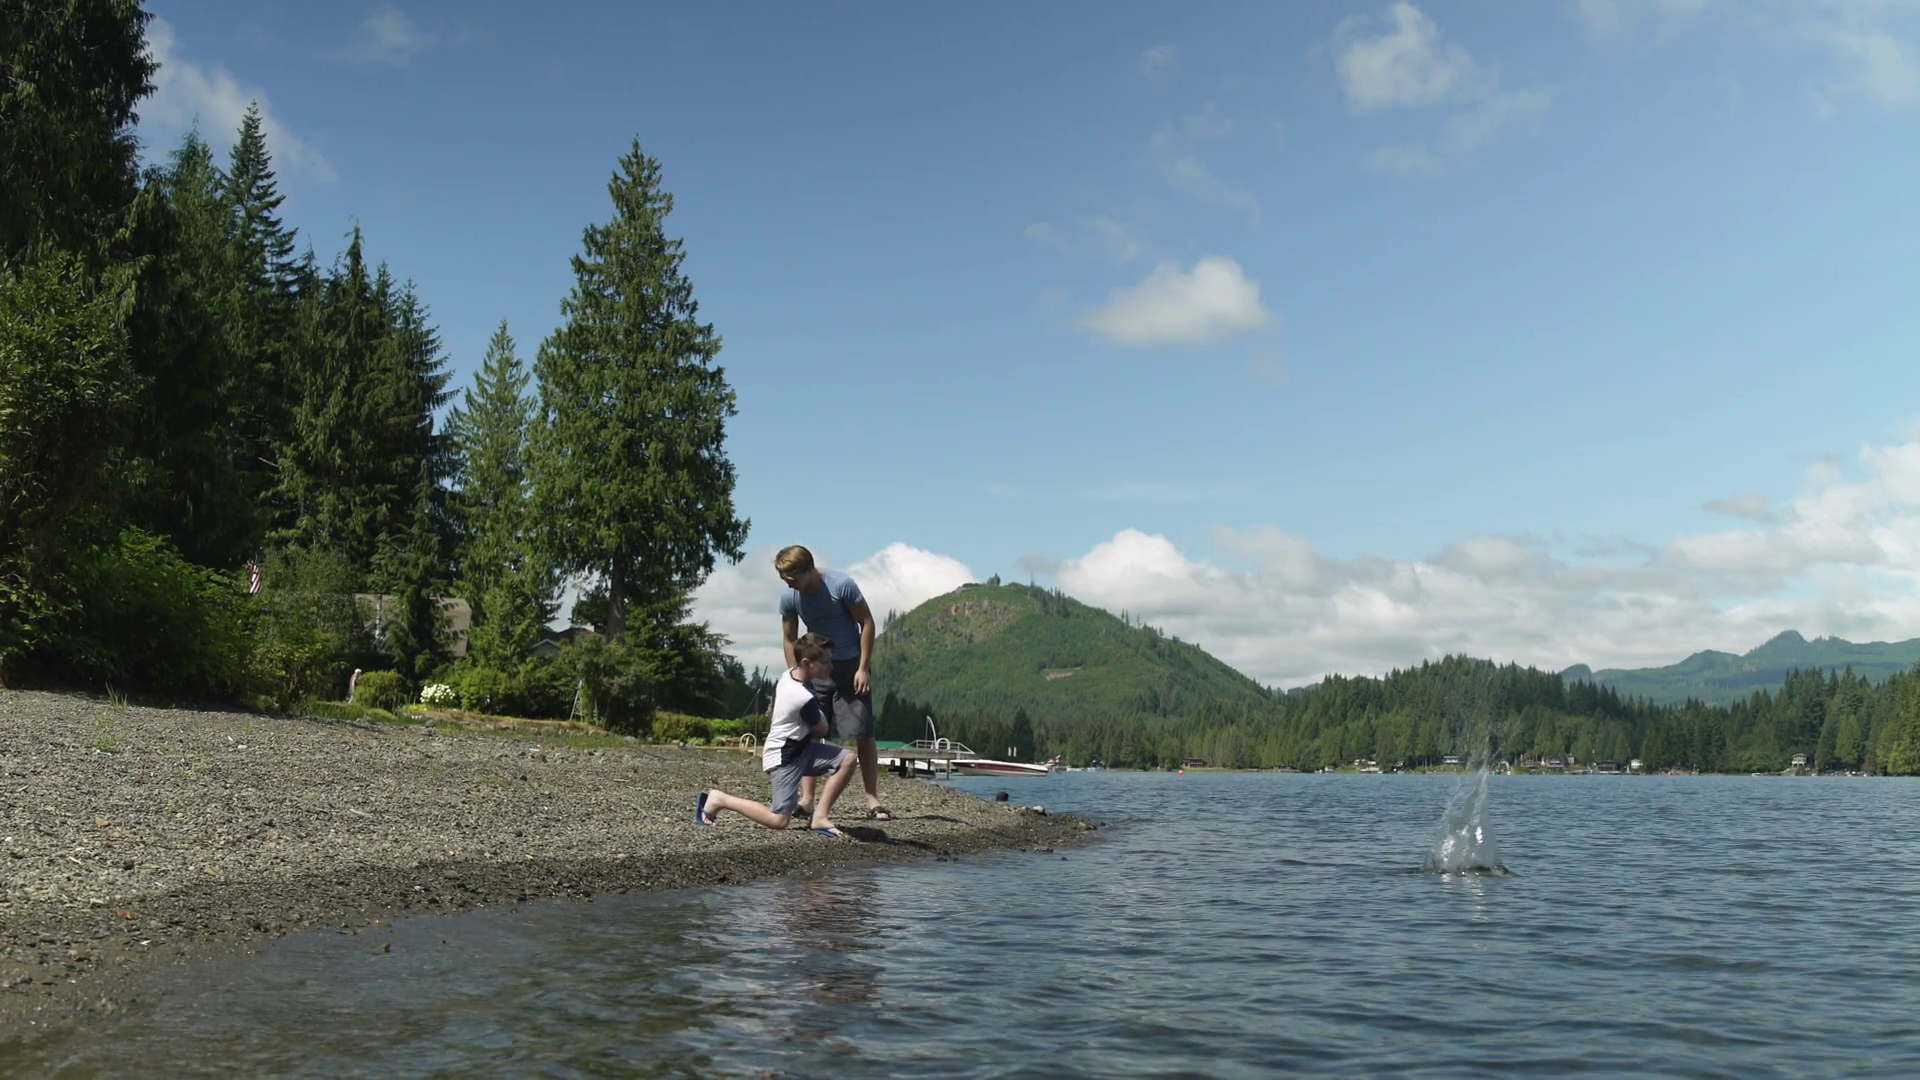 Brothers skimming stones by waters edge, Lake Connaught, Washington ...